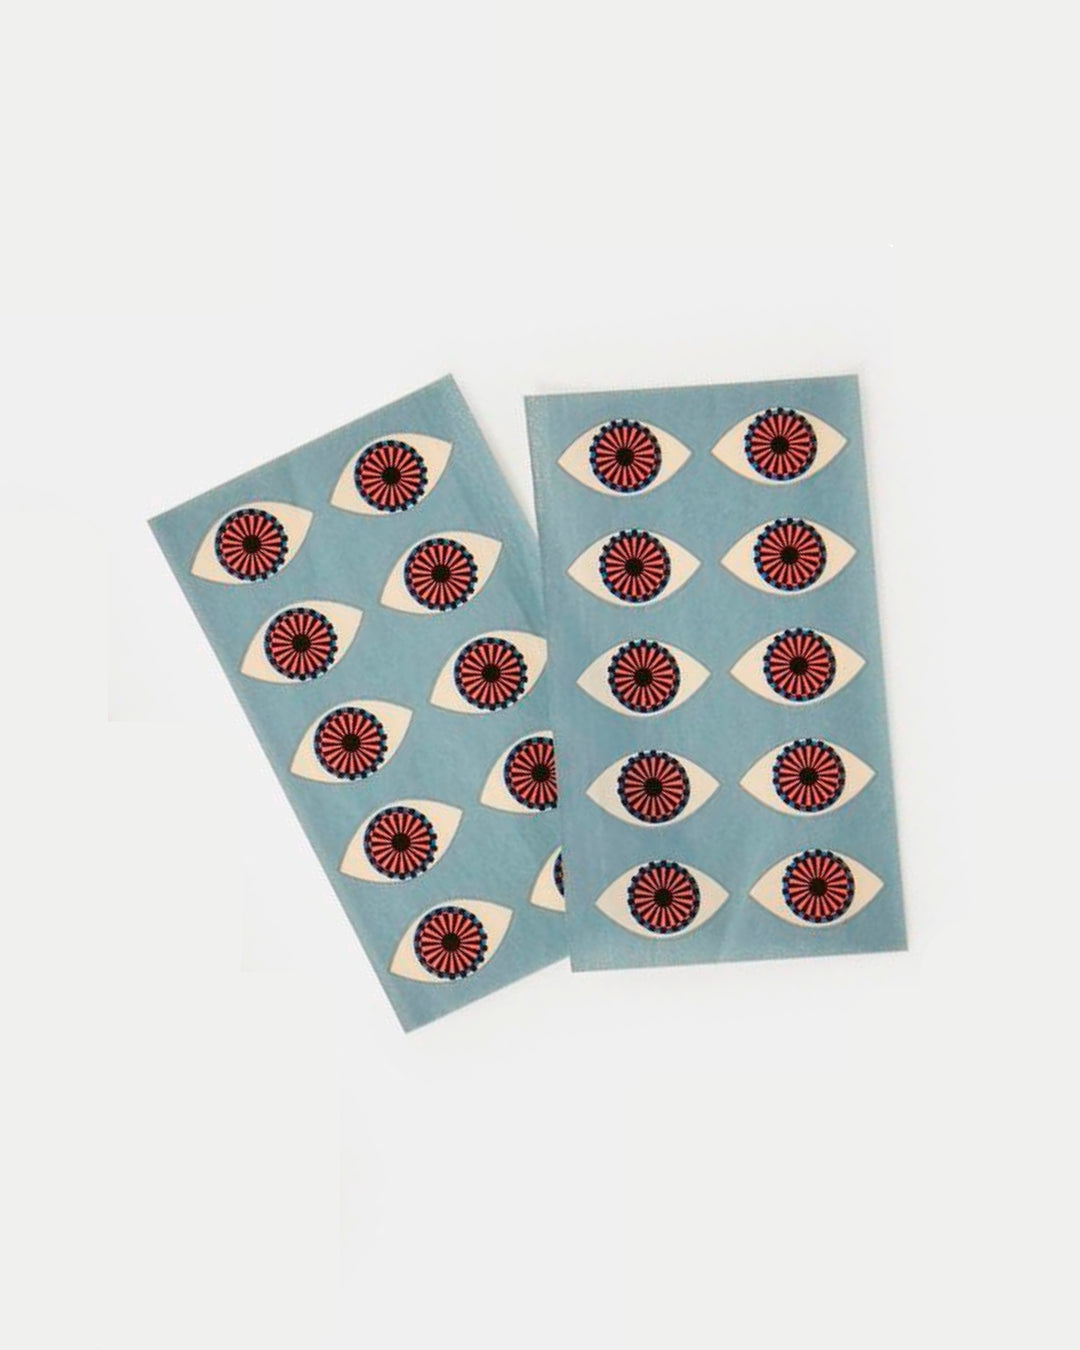 Cute third-eye printed joint rolling papers by Field Trip.